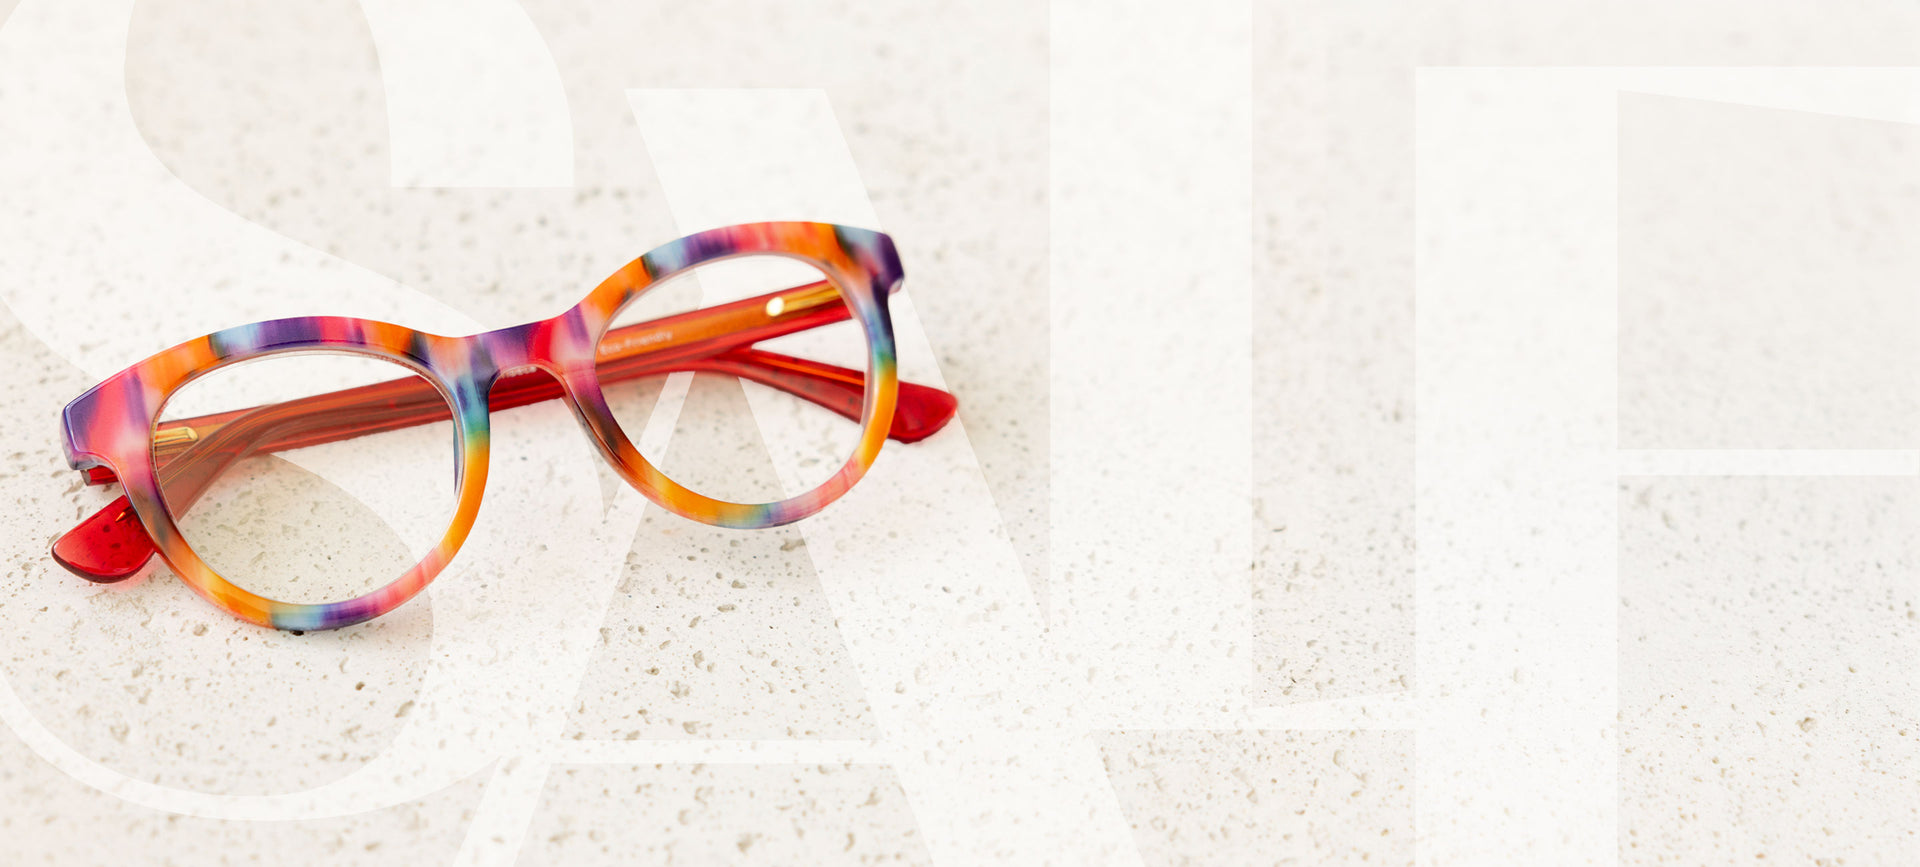 Colorful reading glasses sale banner